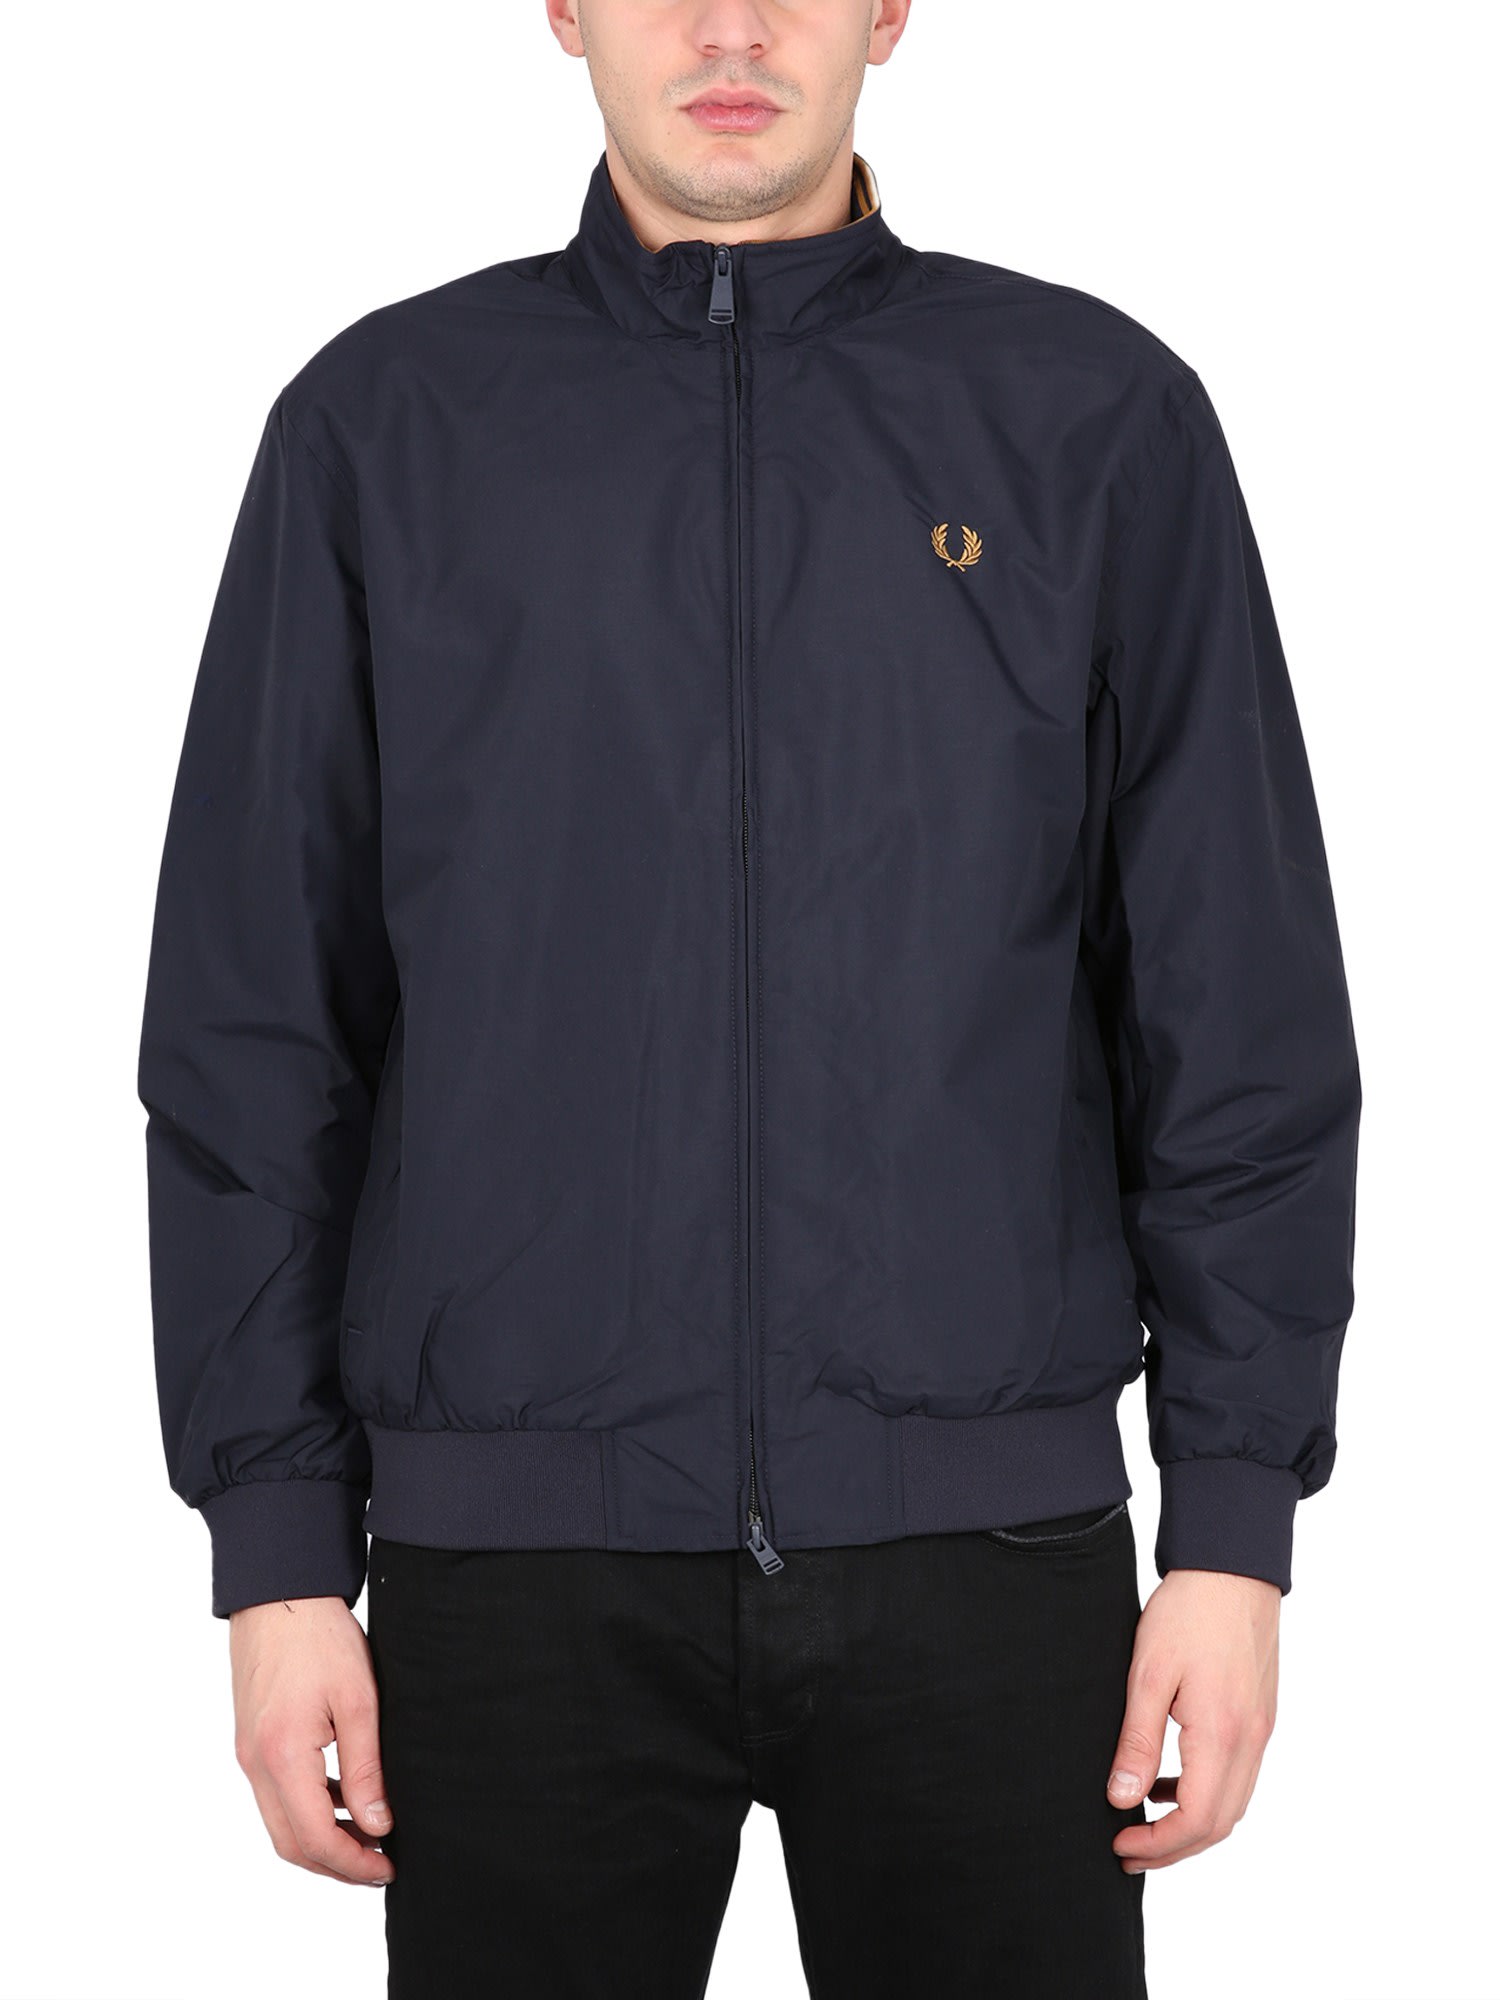 FRED PERRY JACKET WITH LOGO EMBROIDERY